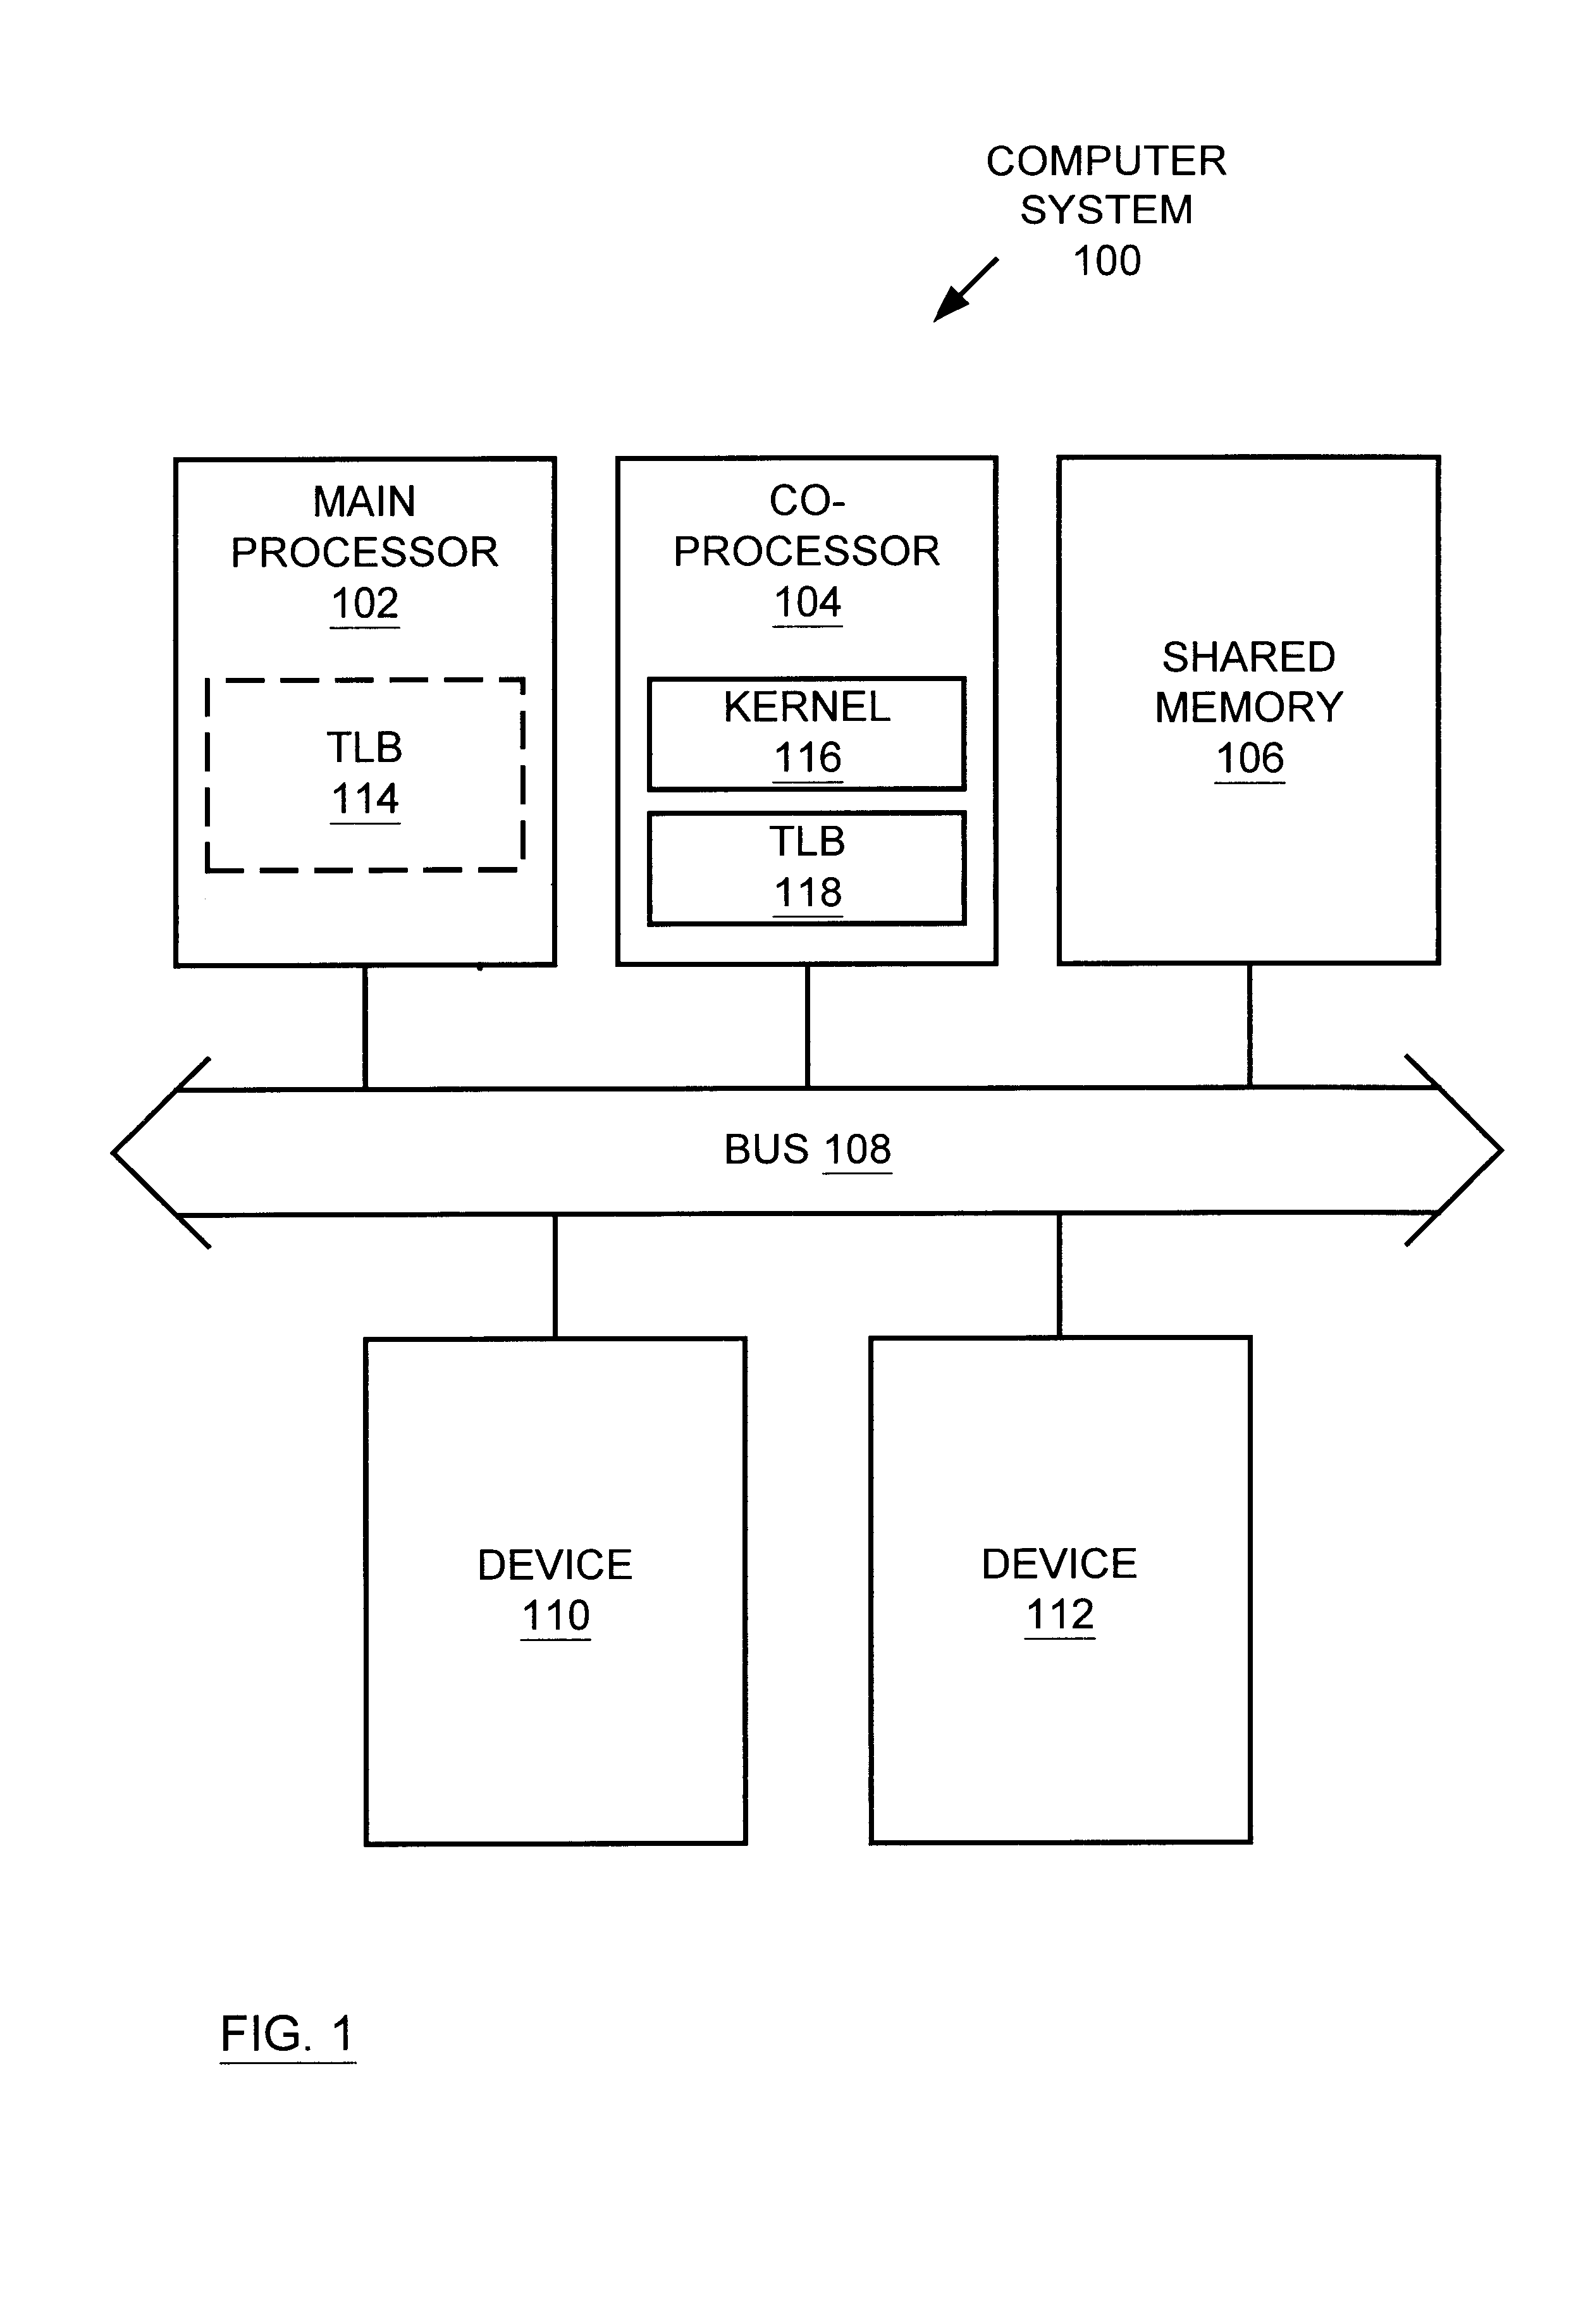 Multiprocessor system implementing virtual memory using a shared memory, and a page replacement method for maintaining paged memory coherence